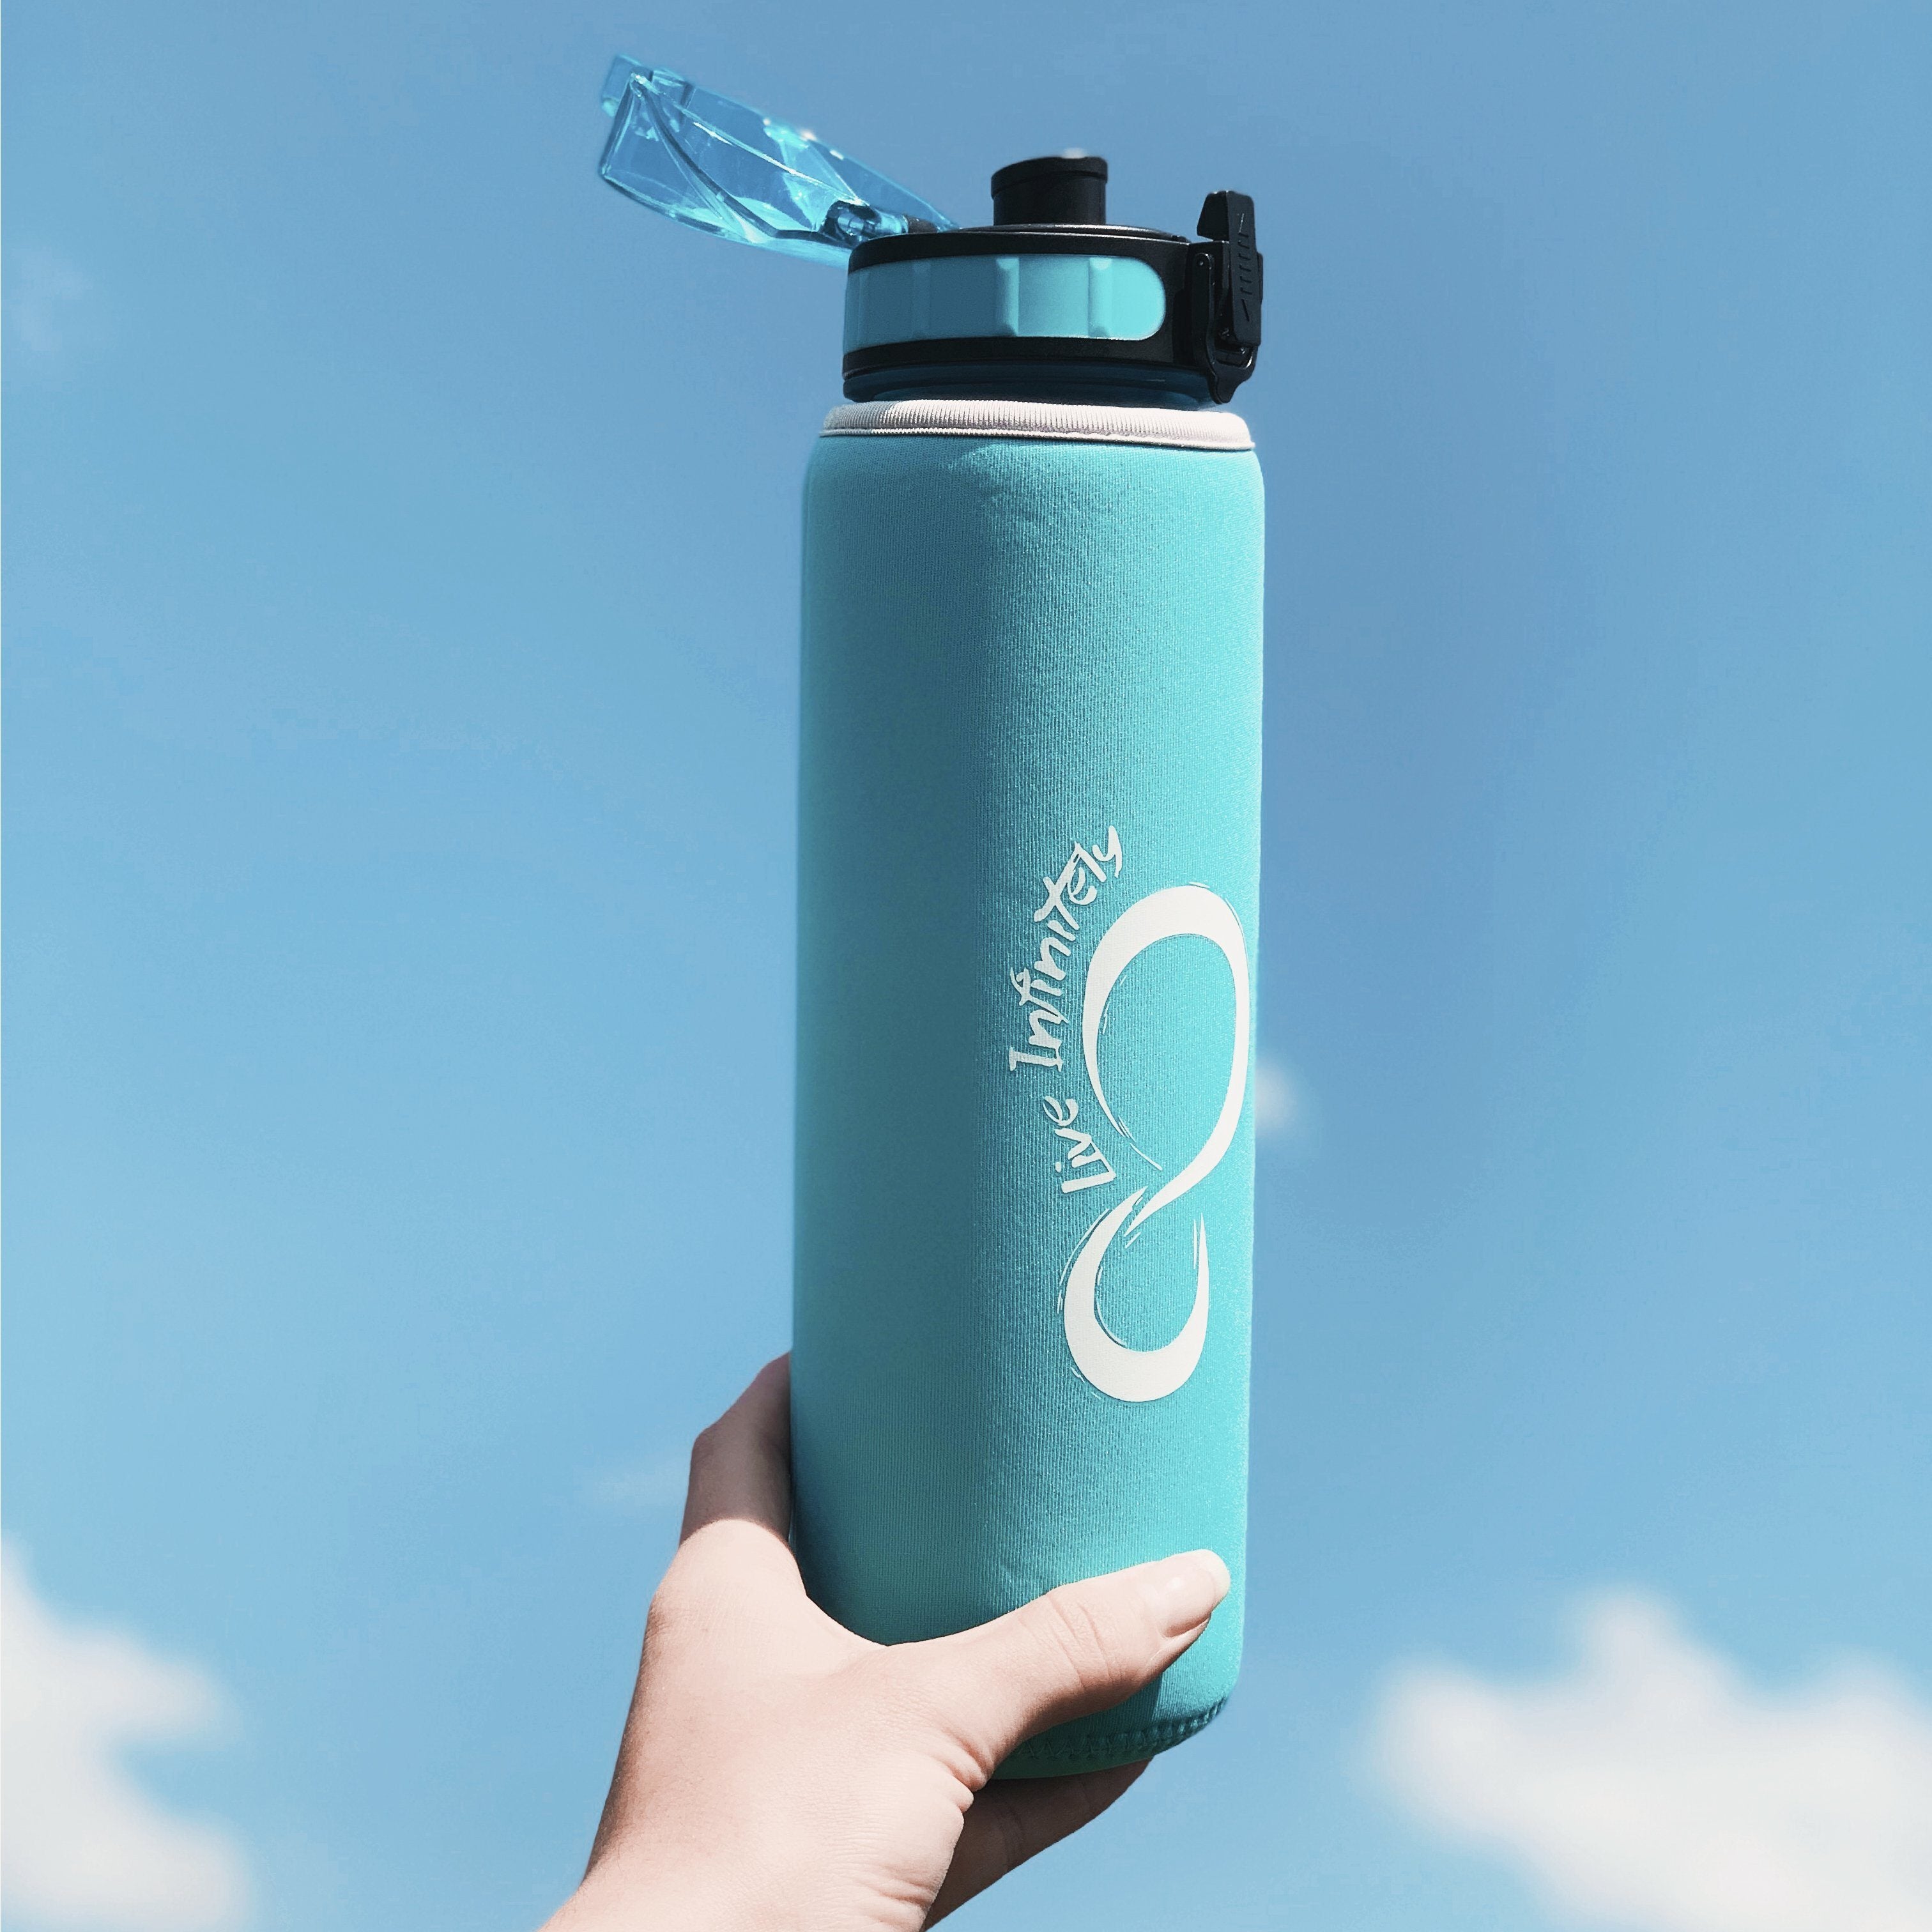 Live Infinitely 24 oz Insulated Water Bottle for Women - Cute Gym